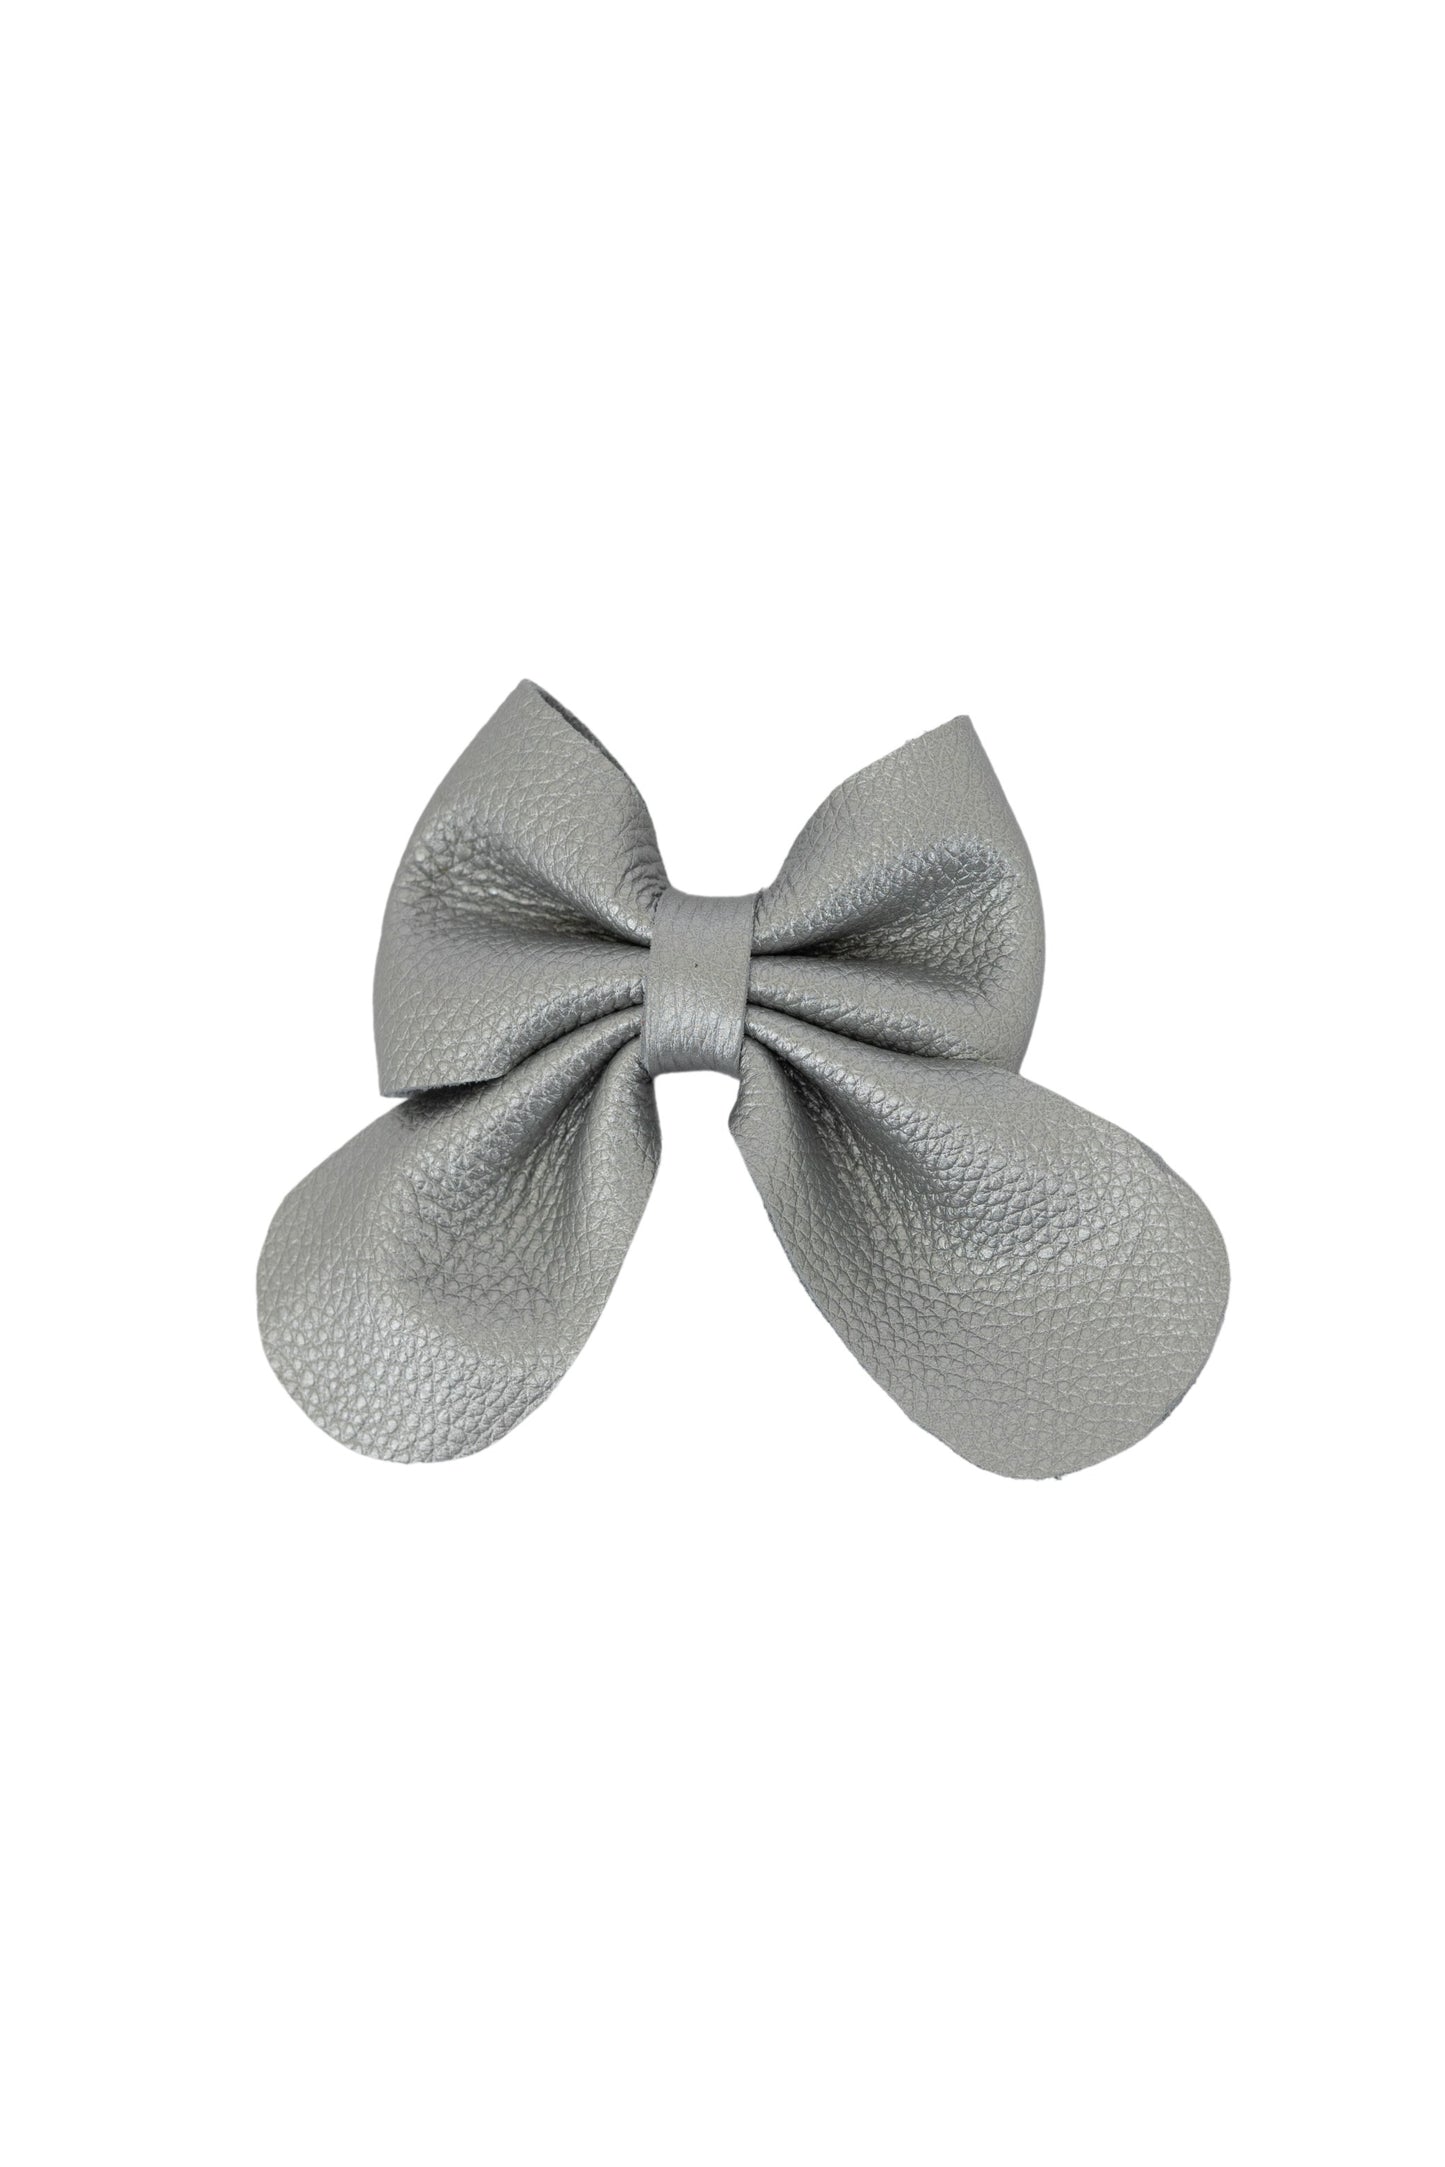 Leather dog bow - Limited edition